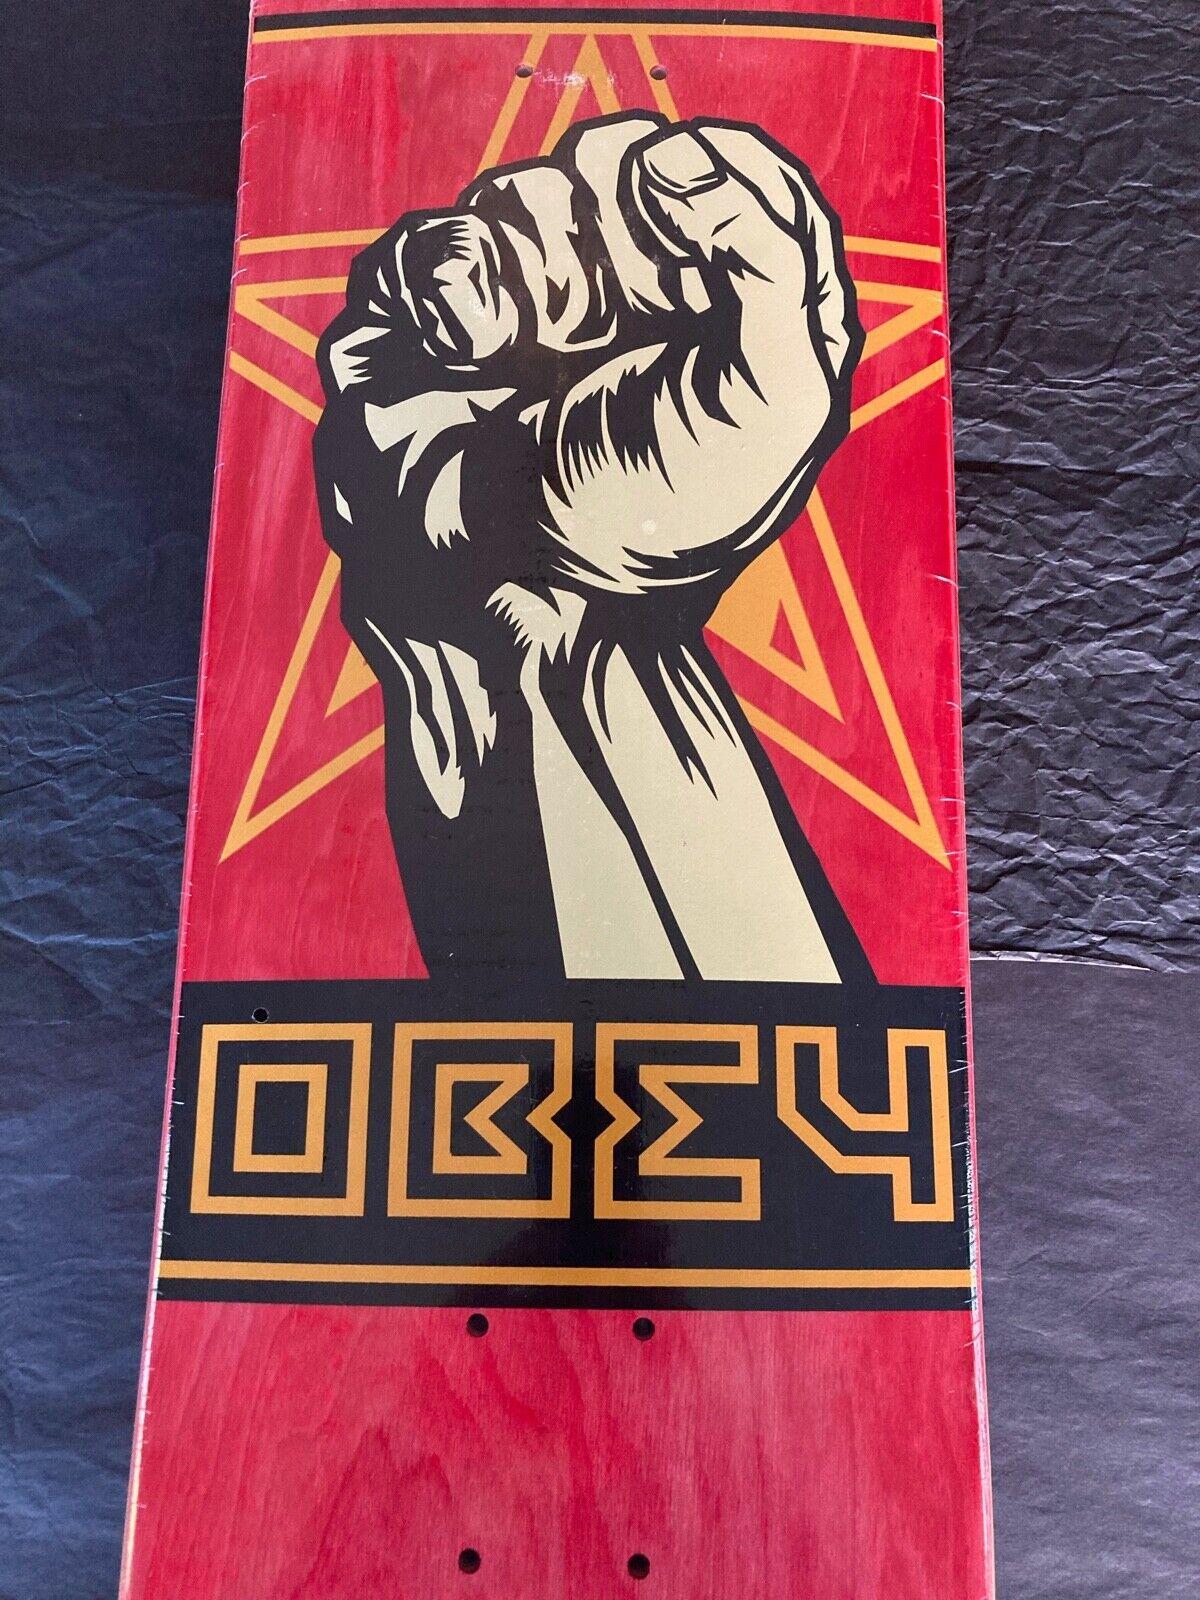 Introducing the Shepard Fairey 